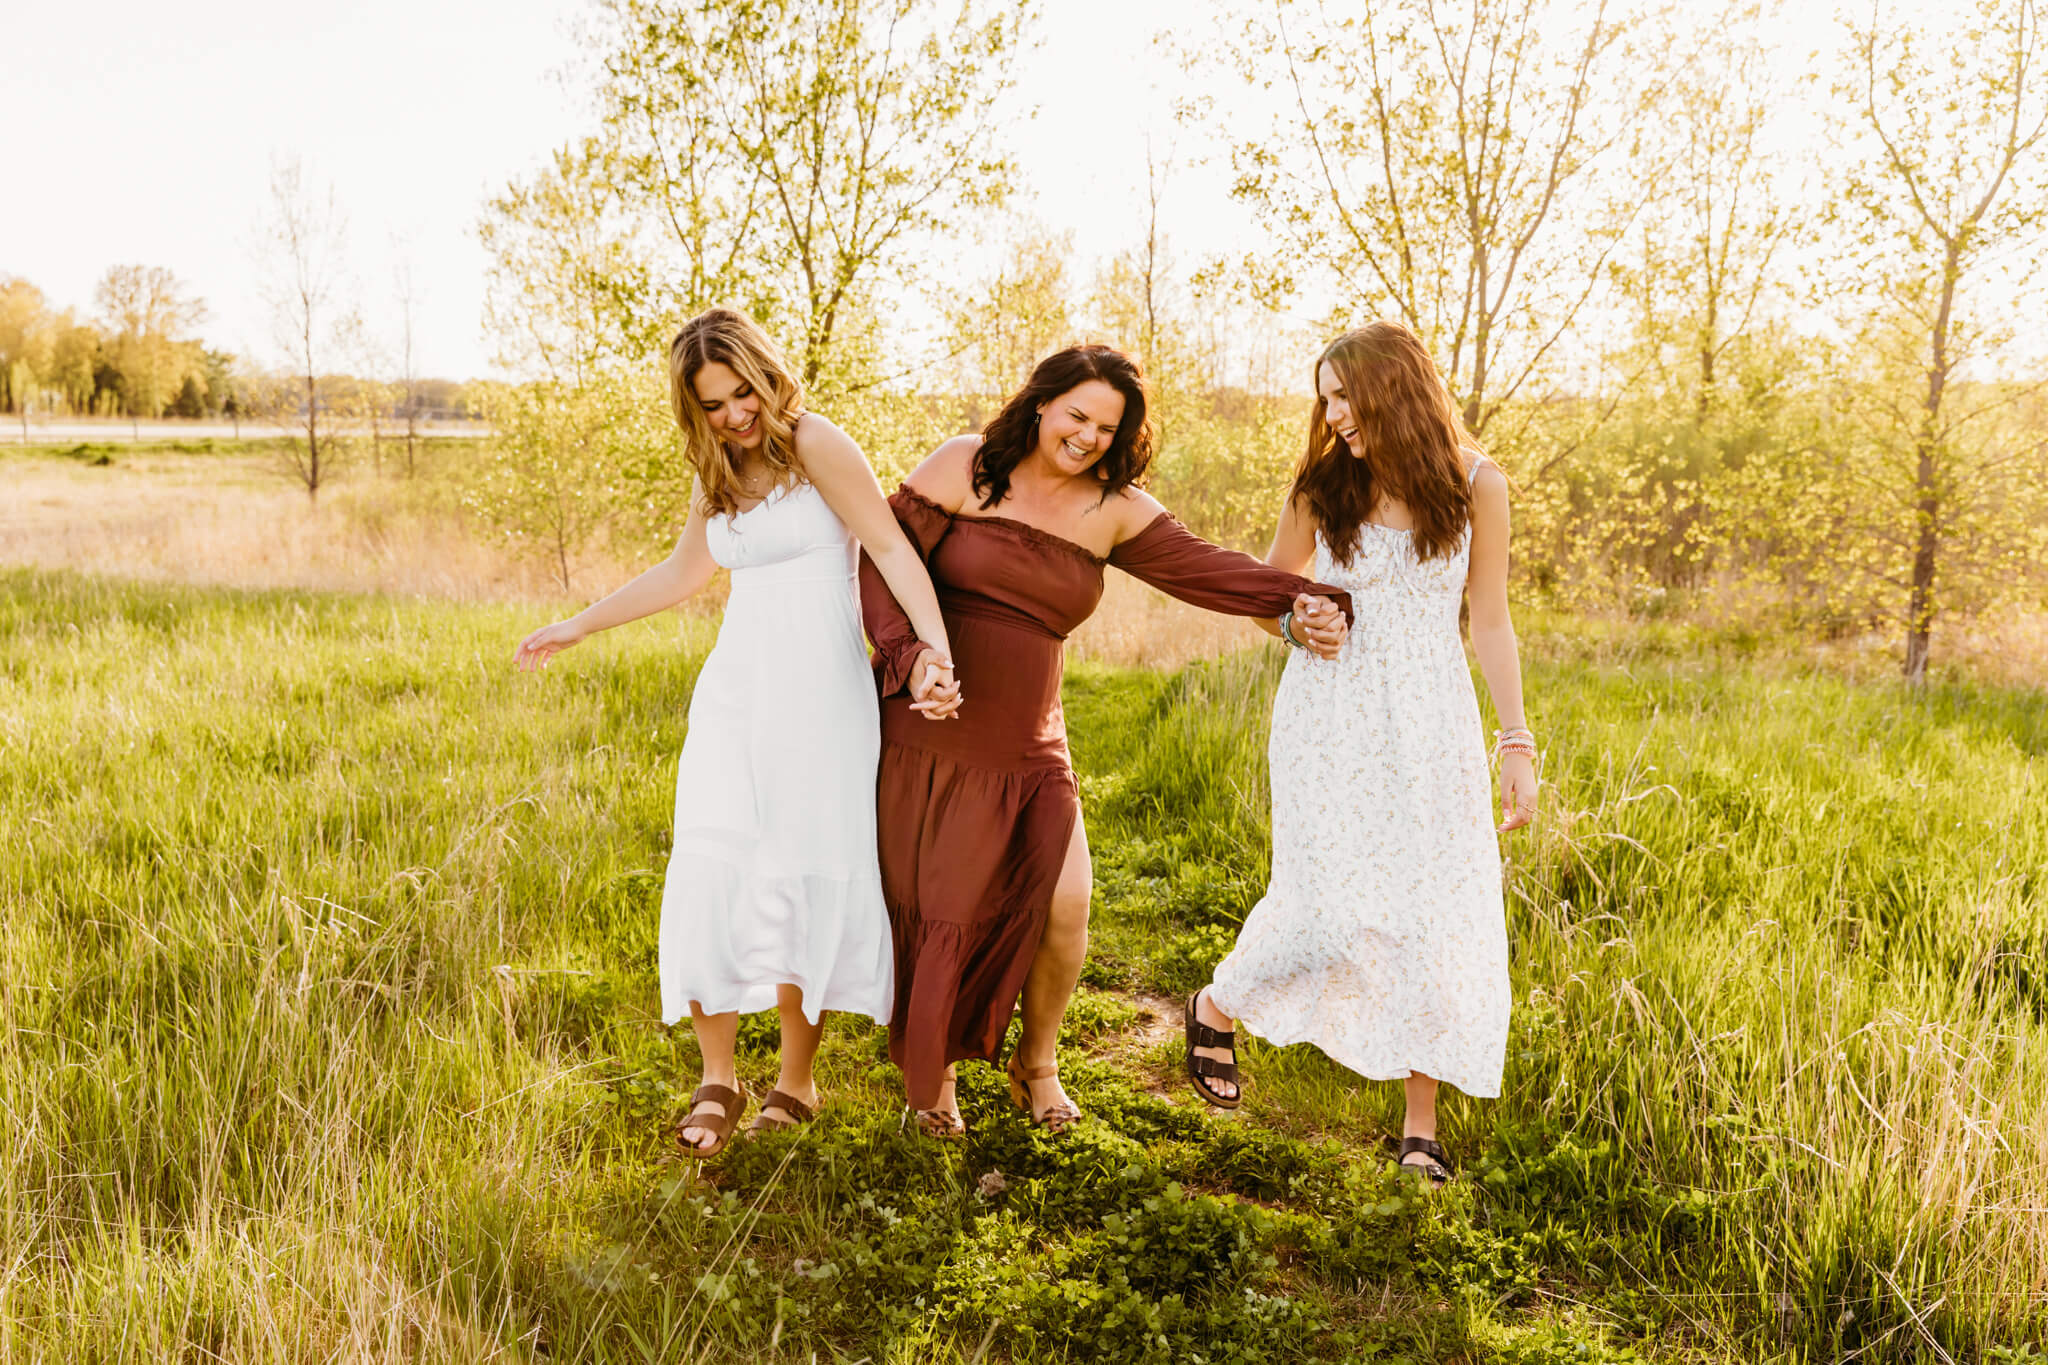 mom and her two teen daughters walking and laughing during their family photo session